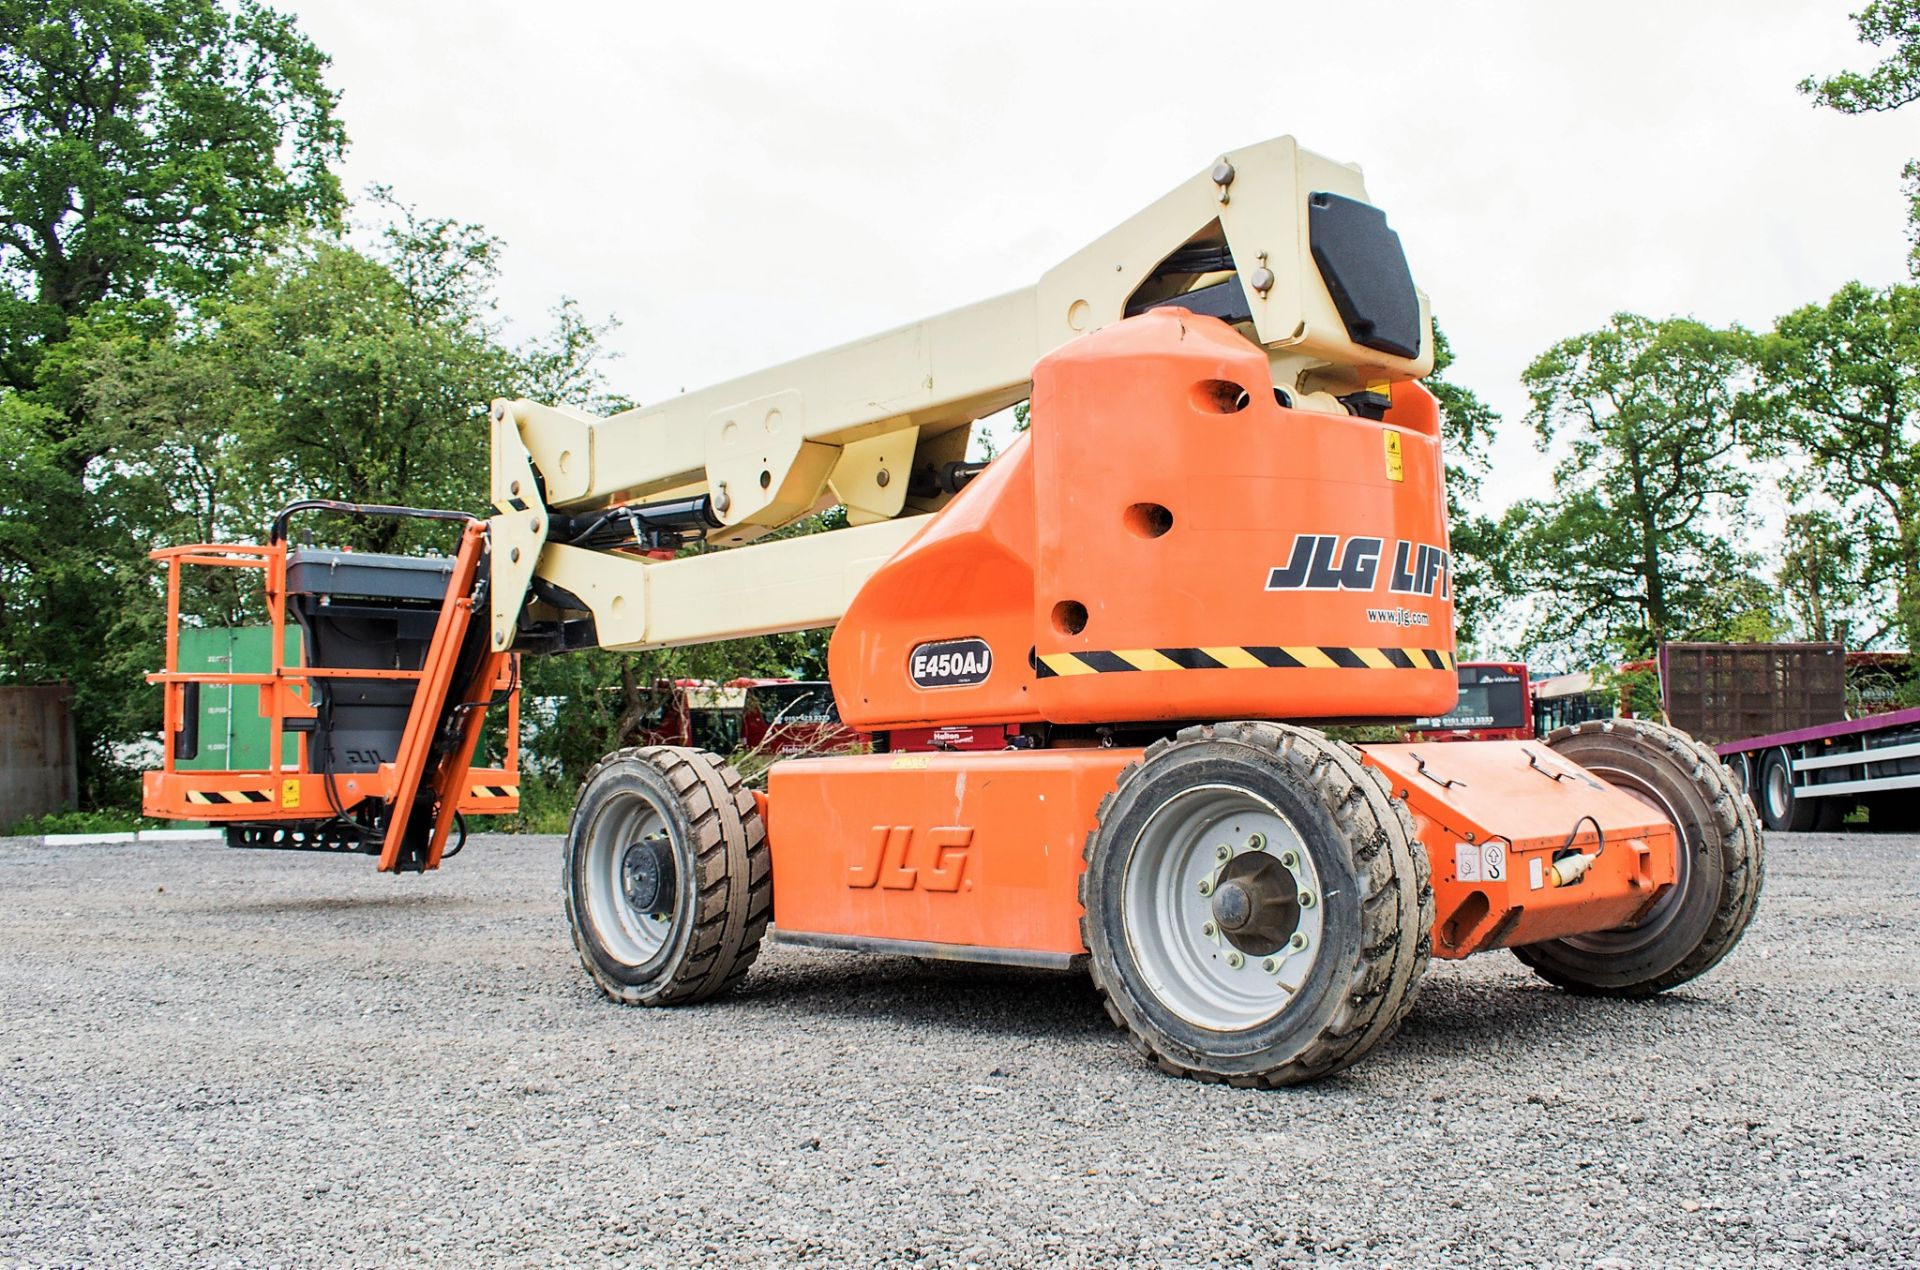 JLG E450AJ battery electric articulated boom access platform Year: 2014 S/N: 189435 Recorded - Image 4 of 18